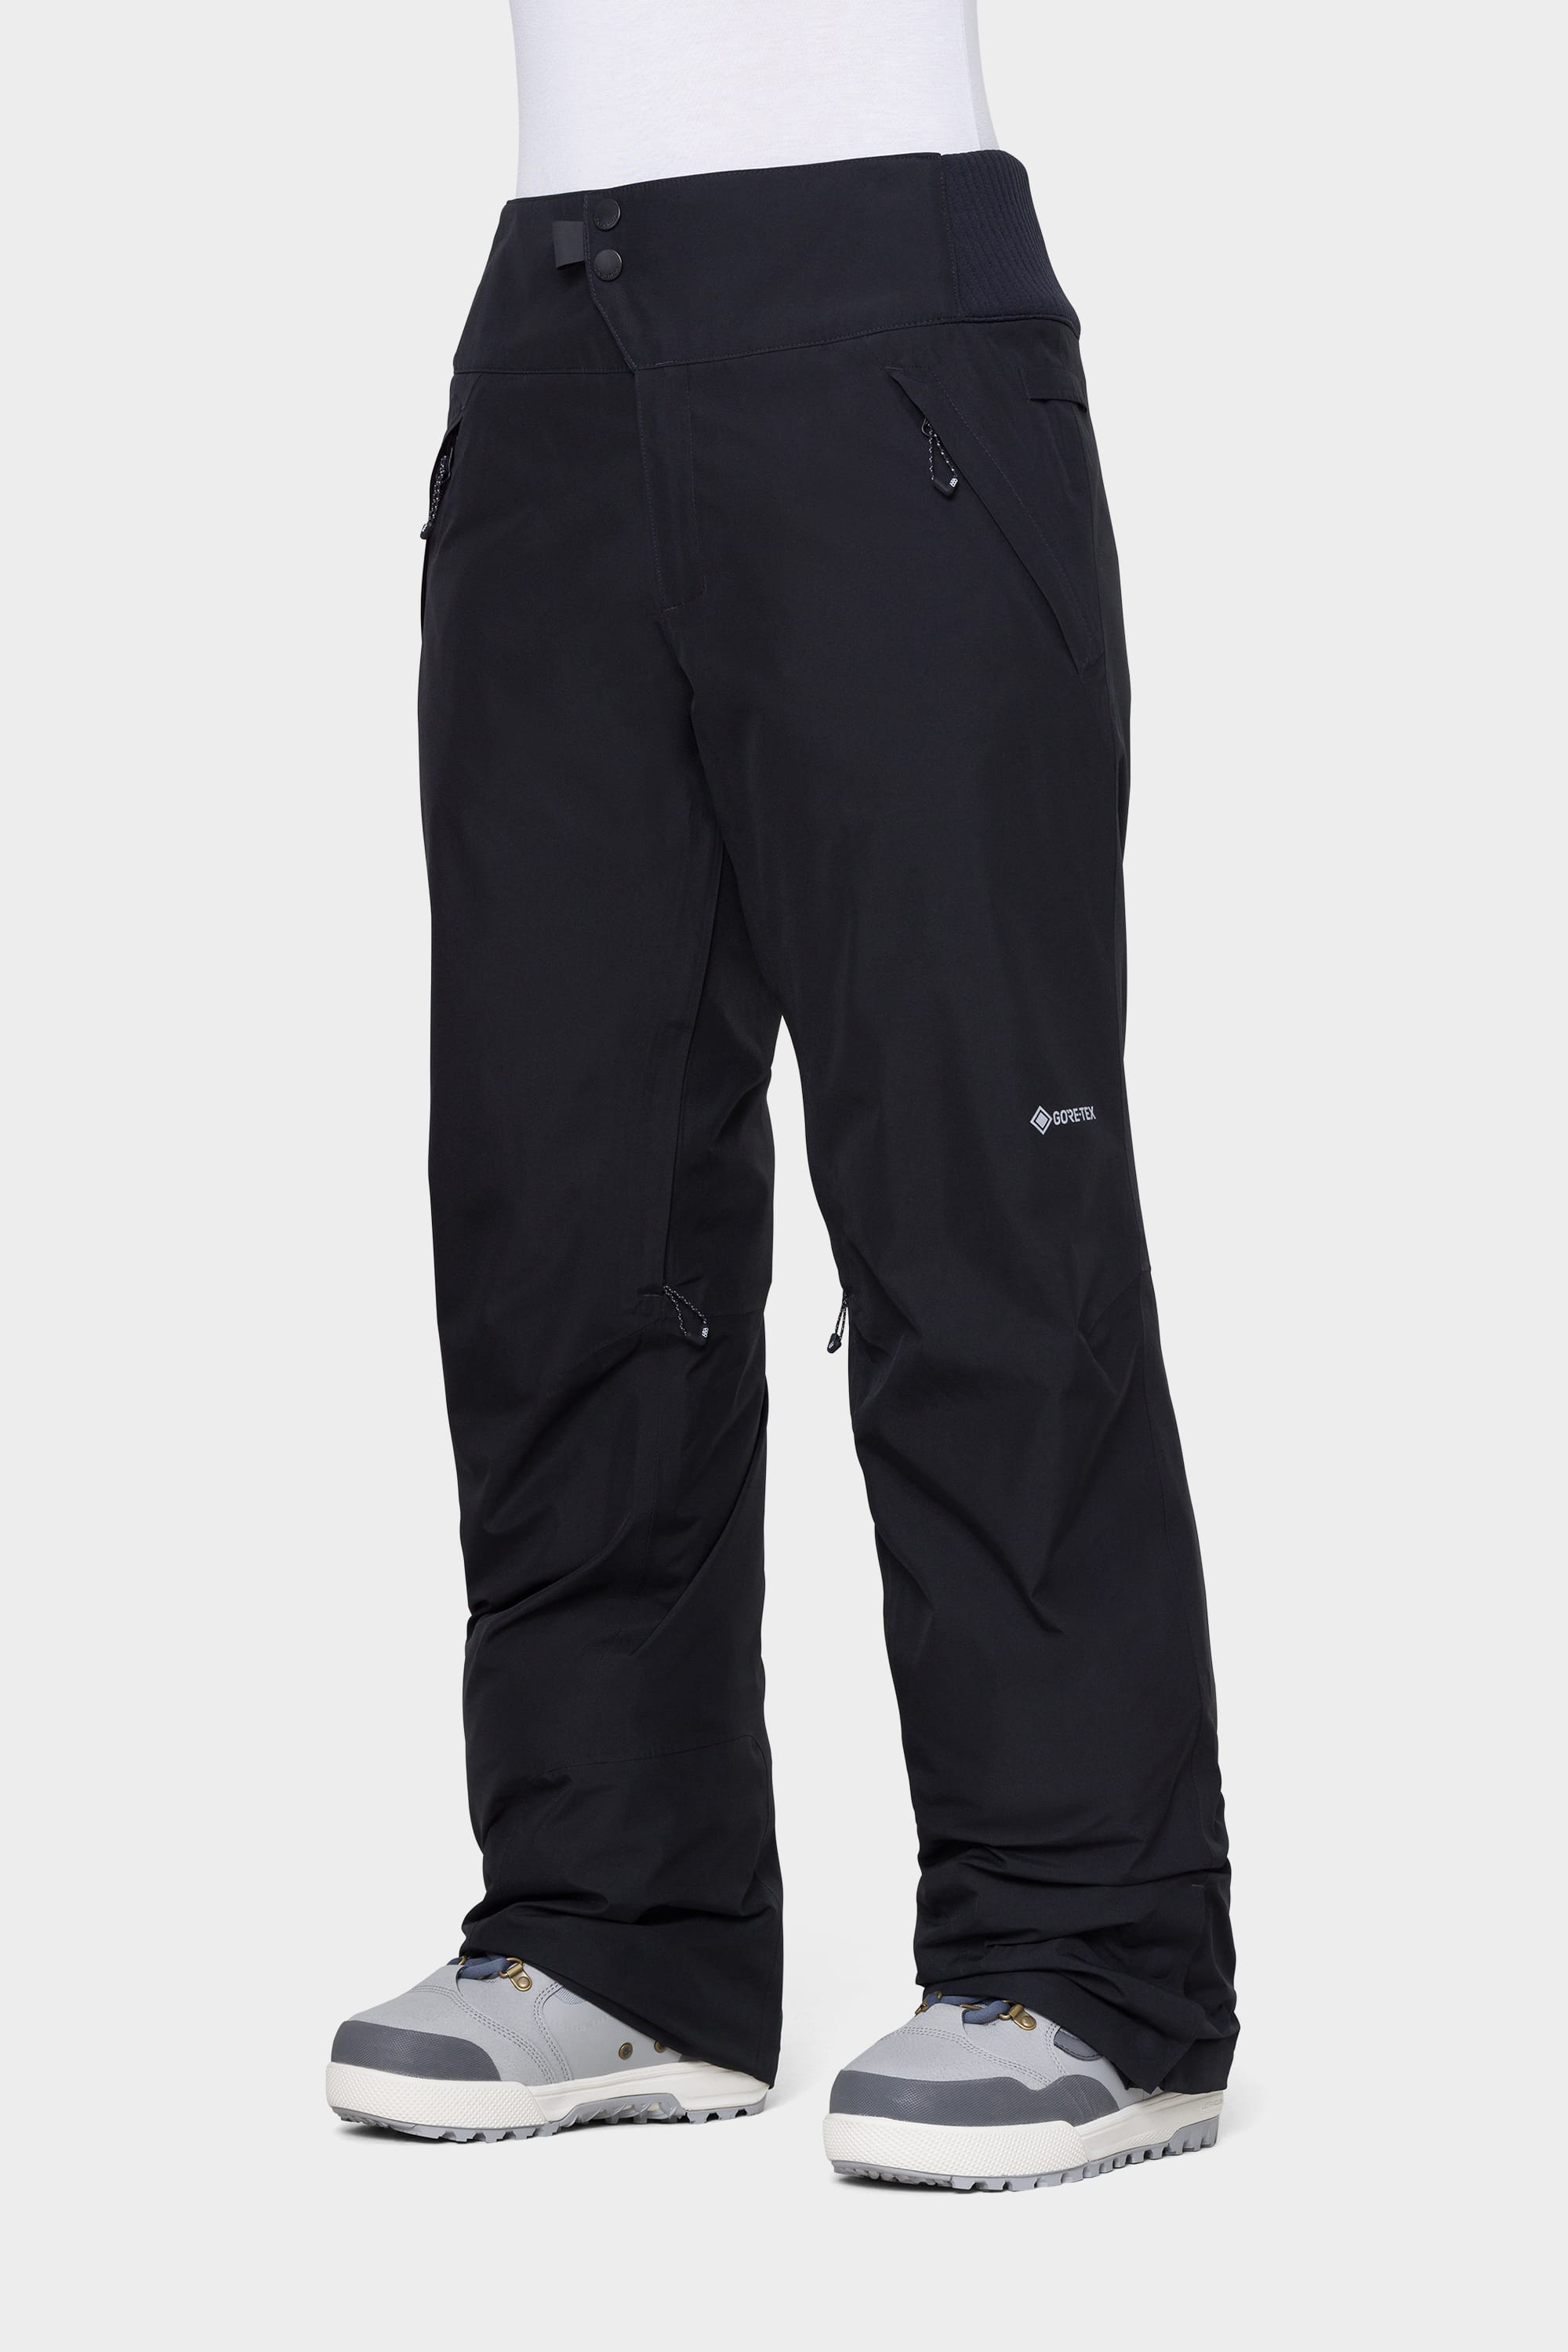 http://ca.686.com/cdn/shop/files/M2W402_Black_WMS_Gore_Tex_Willow_Insulated_Pant_Front_0027_2000x3000_bgEDEDED.jpg?v=1692120916